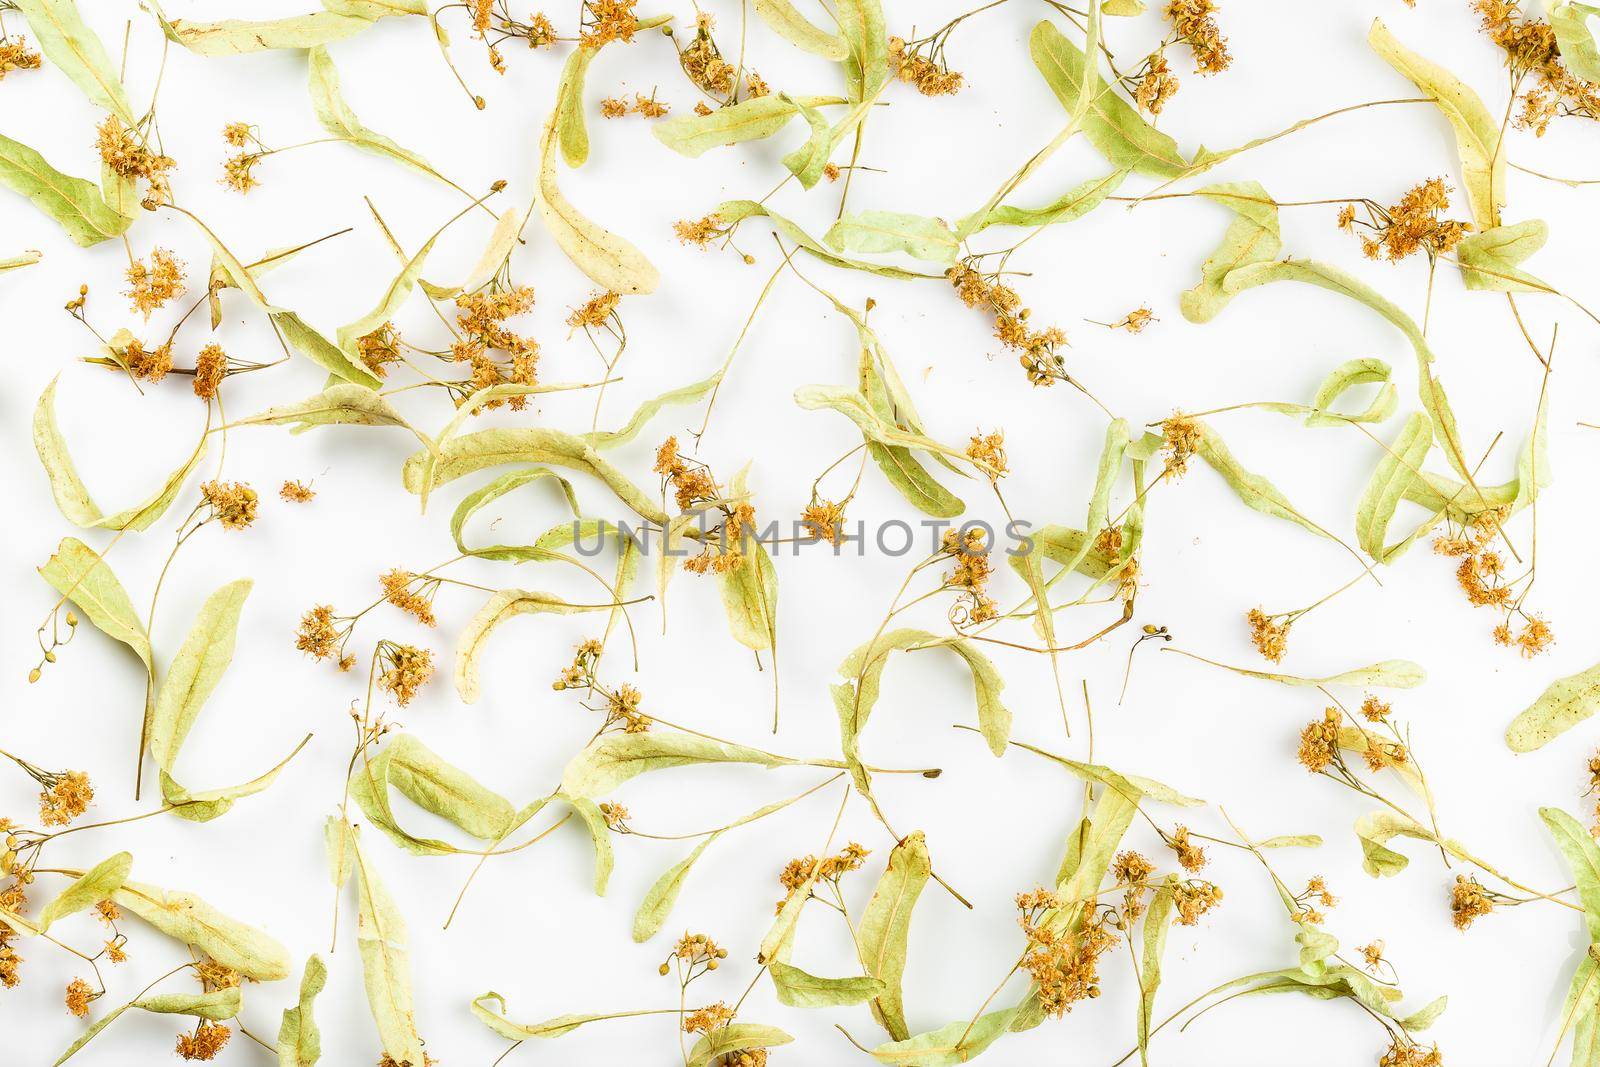 Dried linden tea flowers on the white background by Syvanych